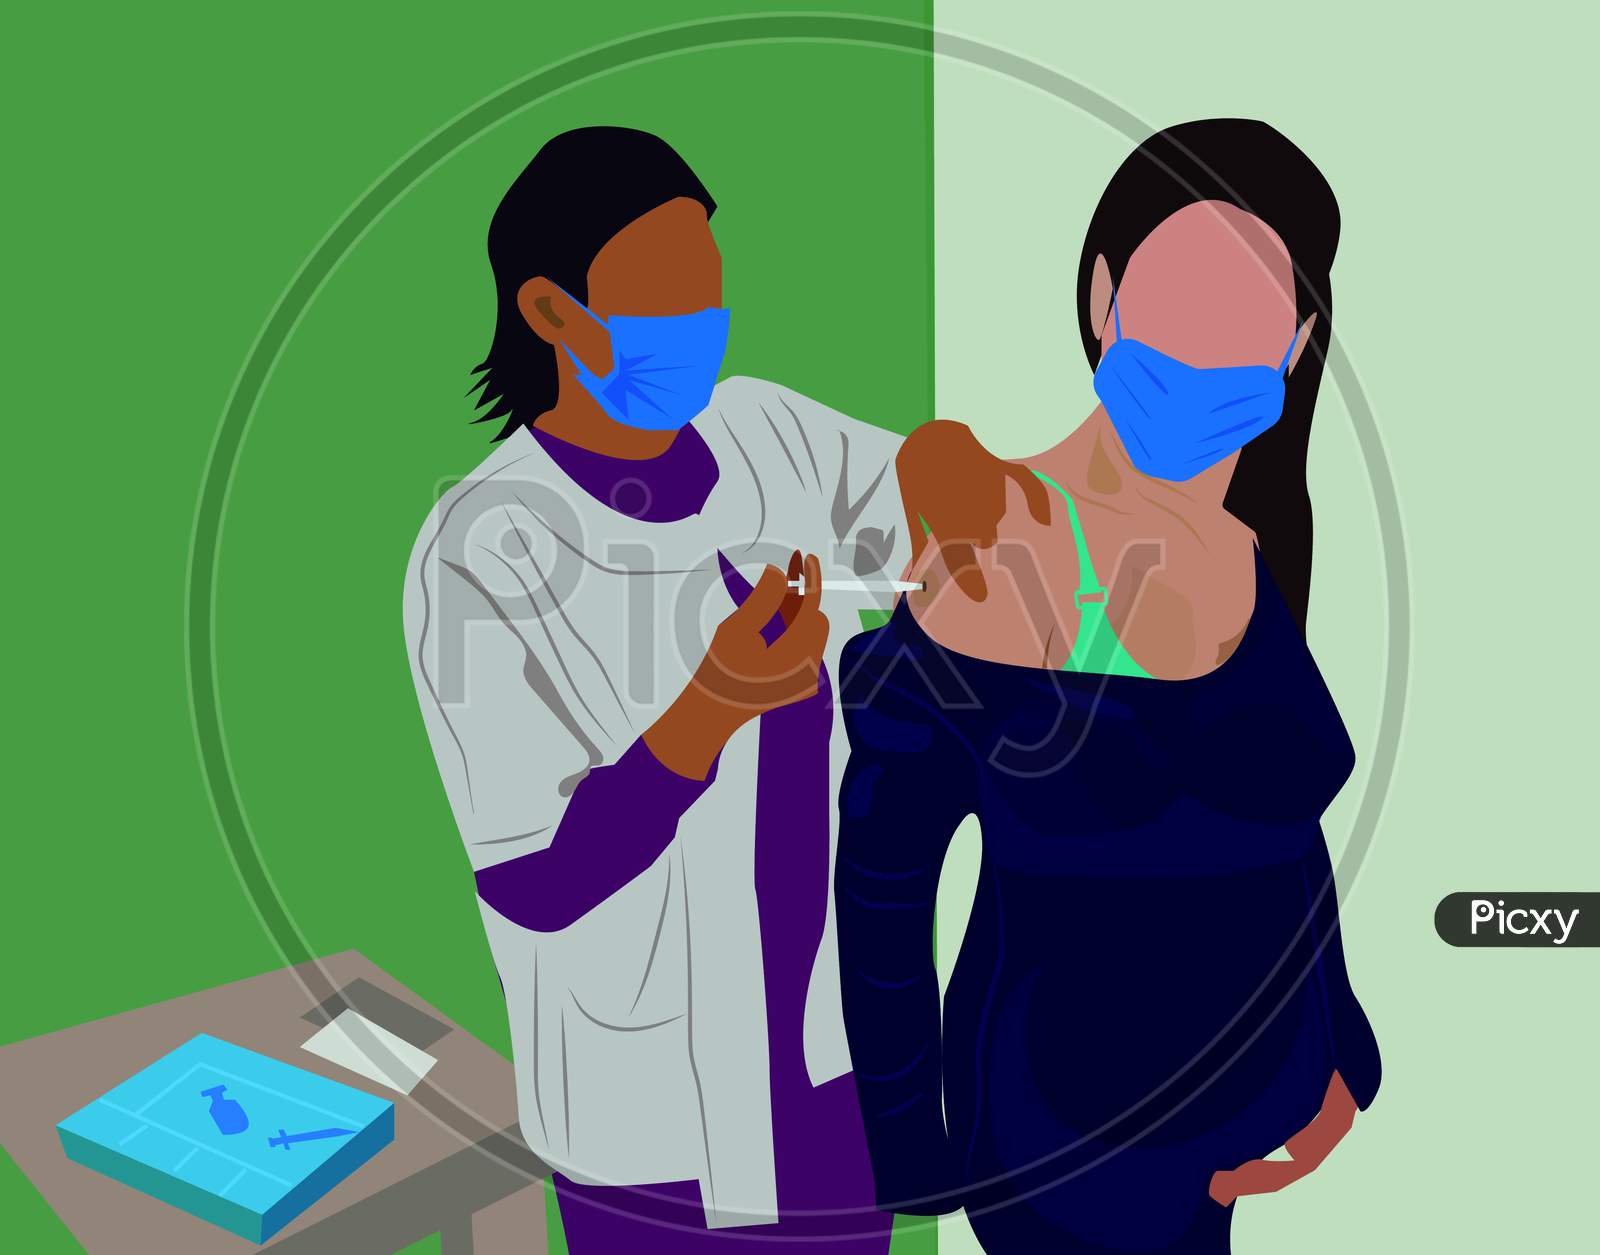 Female doctor giving an injection to a pregnant woman vaccination poster Vector illustration Medicine health concept